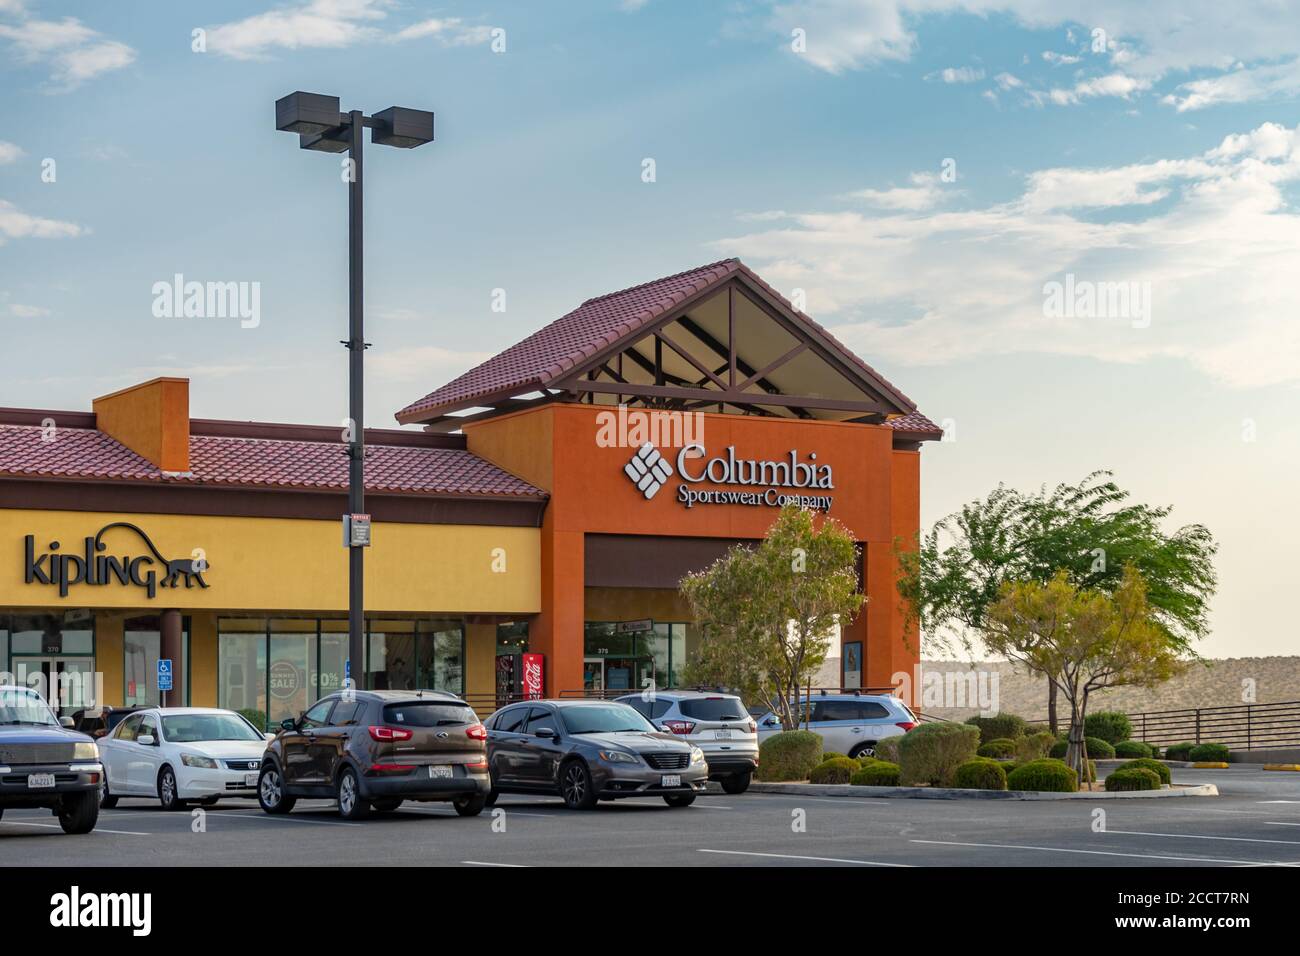 Barstow, CA / USA – August 22, 2020: Columbia Sportswear Company at The Outlets at Barstow located adjacent to Interstate 15 in Barstow, California. Stock Photo